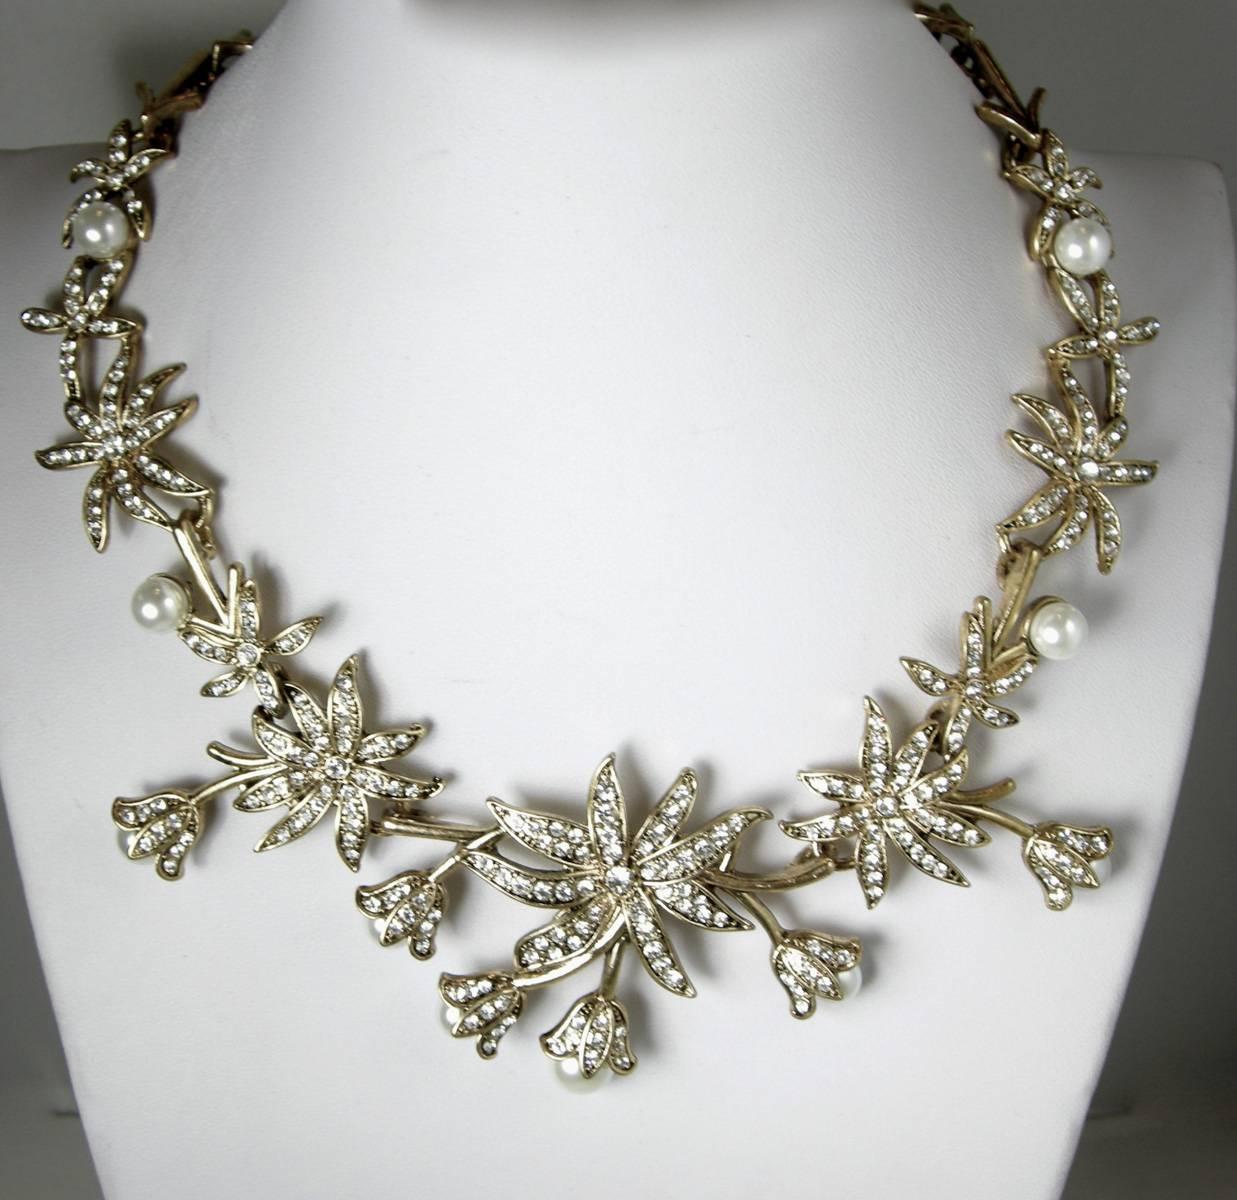 This beautiful Oscar de la Renta necklace has a floral design with Swarovski crystals and simulated pearls and sits beautifully on the neck.  The necklace is 16” but can be extended to 20” long.  It is 2-1/2” wide.  It is signed “Oscar de la Renta”.